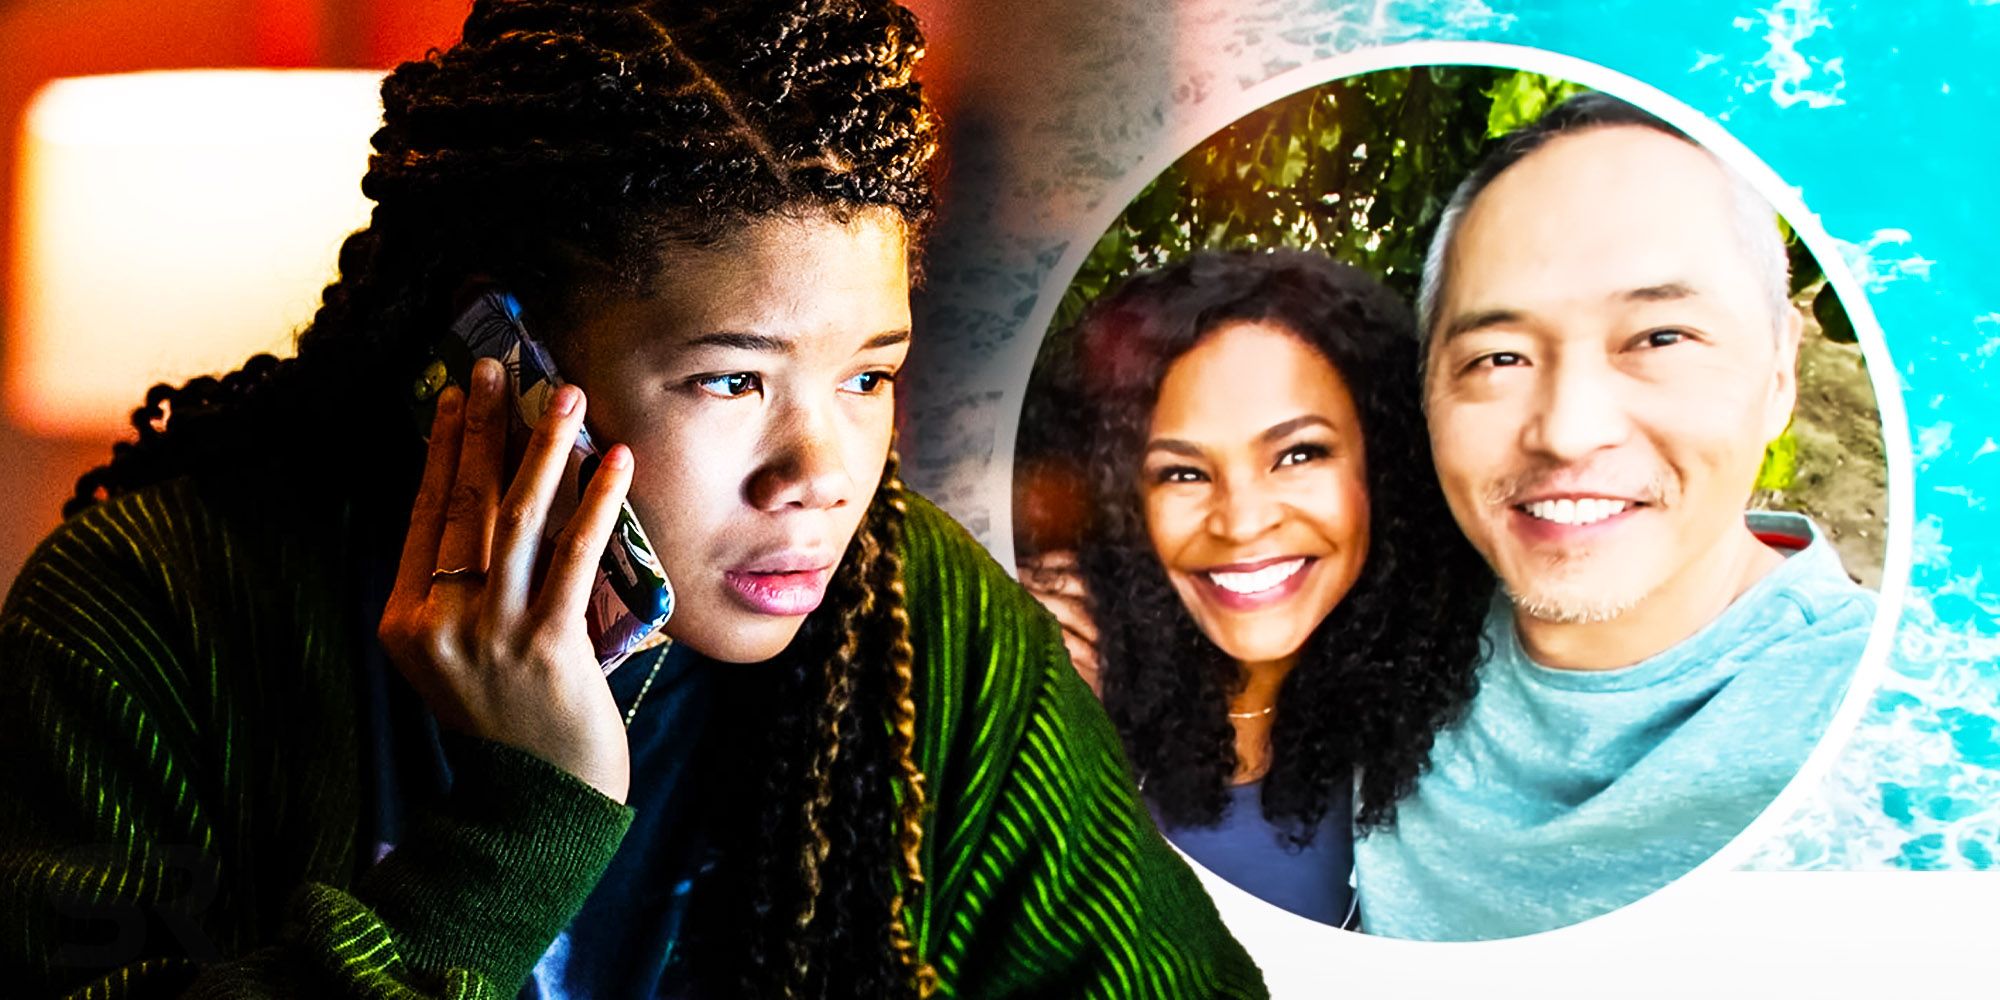 Collage from Missing movie of Storm Reid, Nia Long as Grace Allen, and Ken Leung